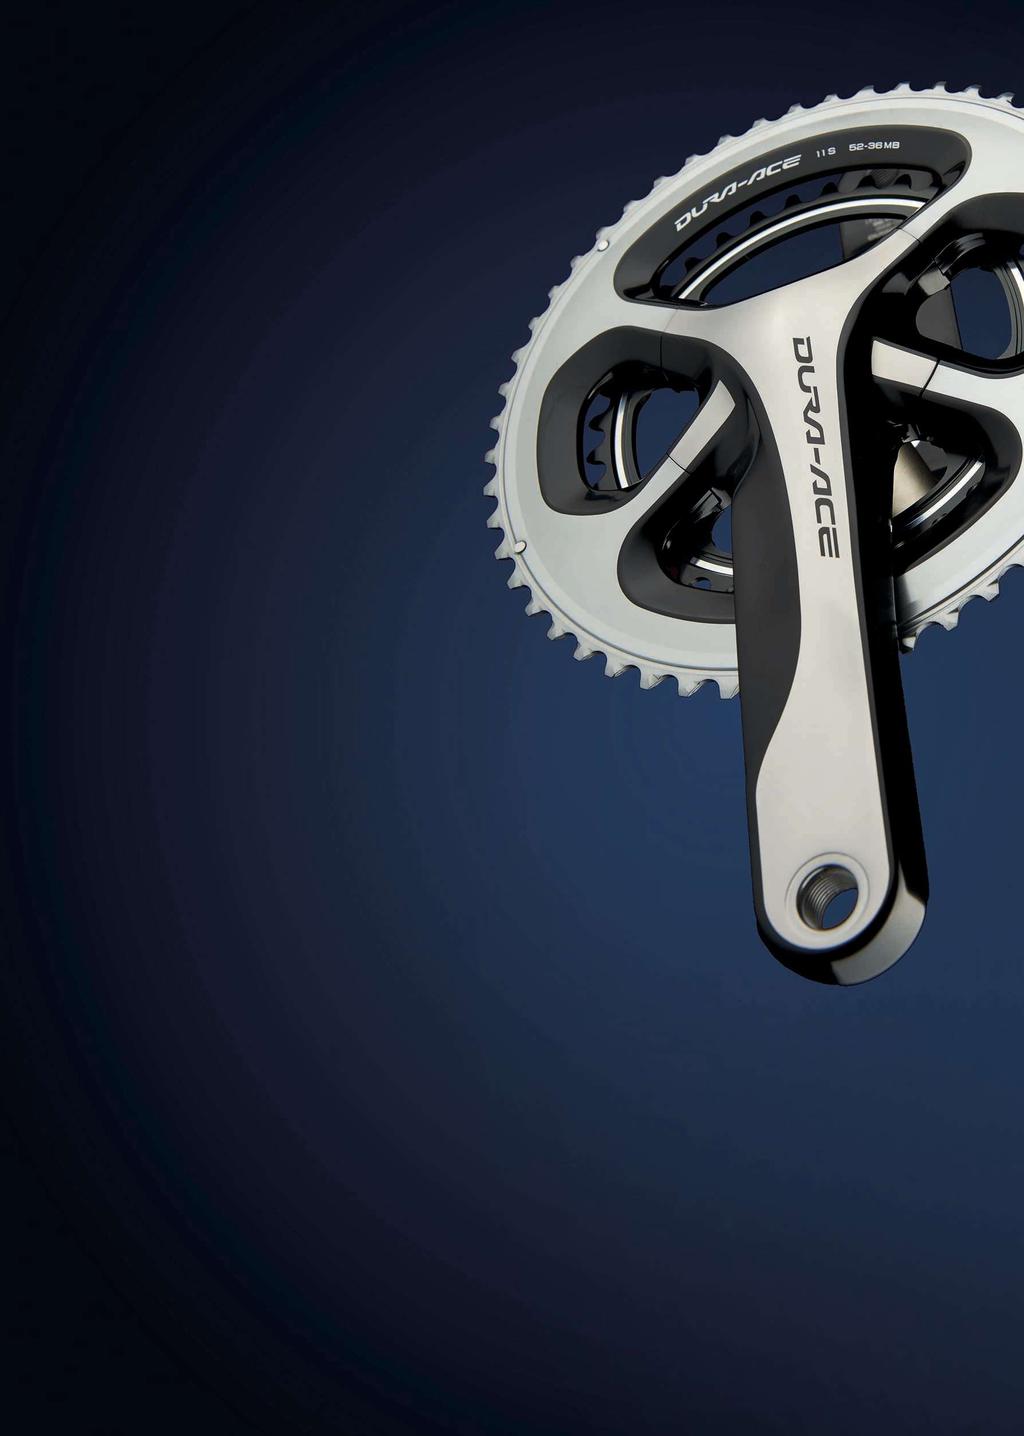 3 1 2 CRANK LENGTH Cranks the arms come in different lengths to match different length legs and leverage preferences. The average is 172.